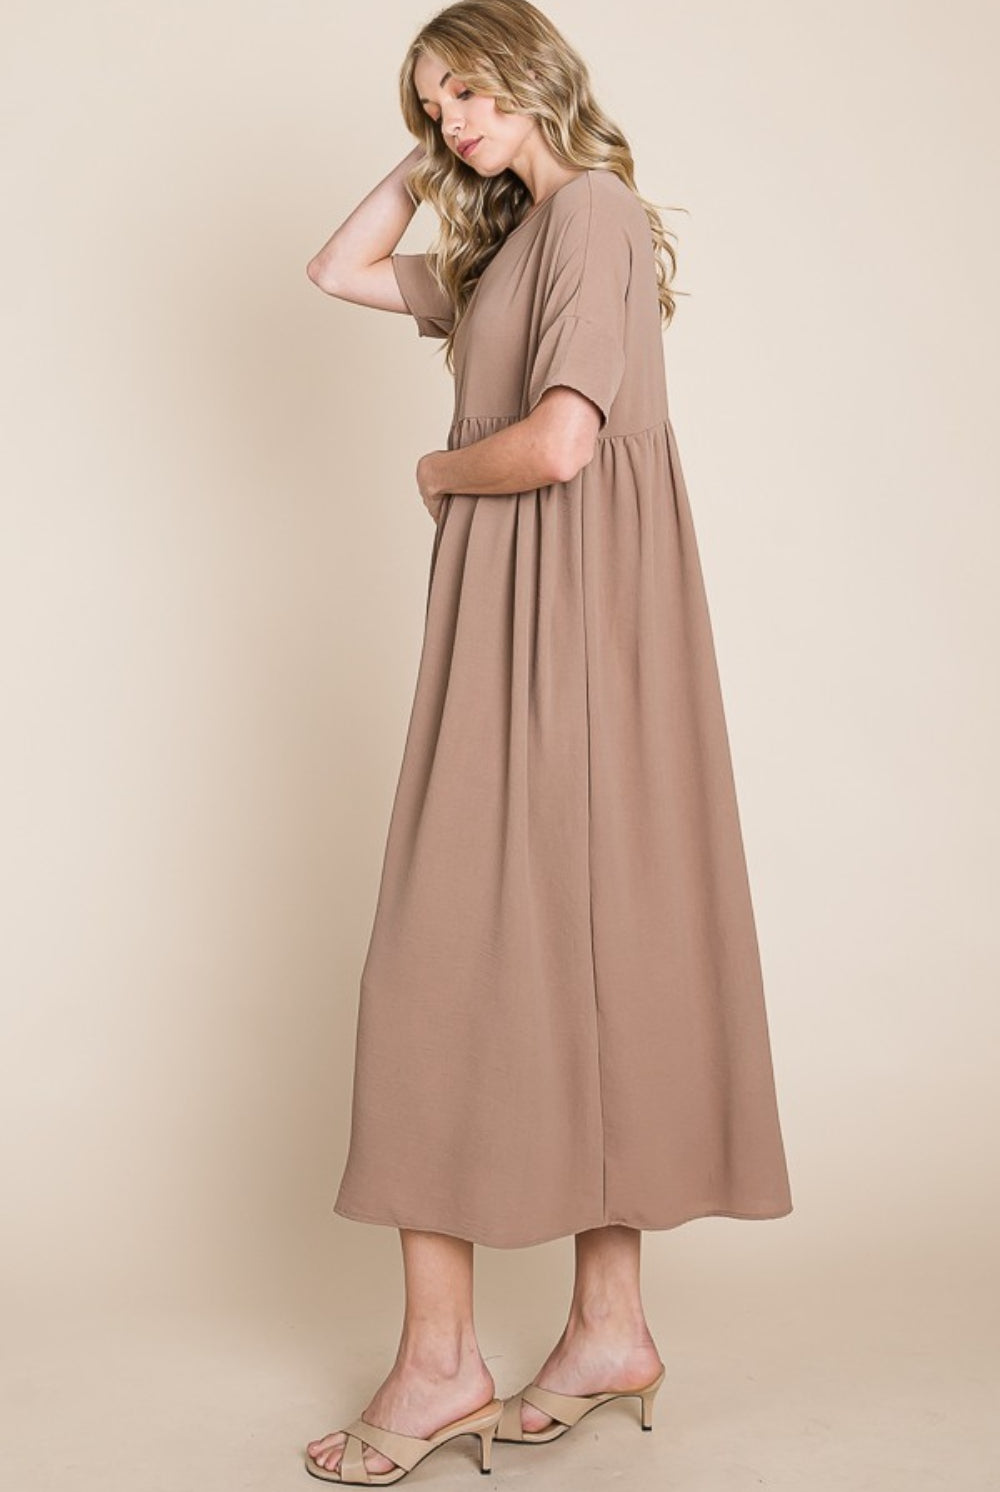 Model wears an Elegant Ruched Midi Dress in a neutral taupe, featuring a flattering waist and flowing skirt, exemplifying classic grace and style.